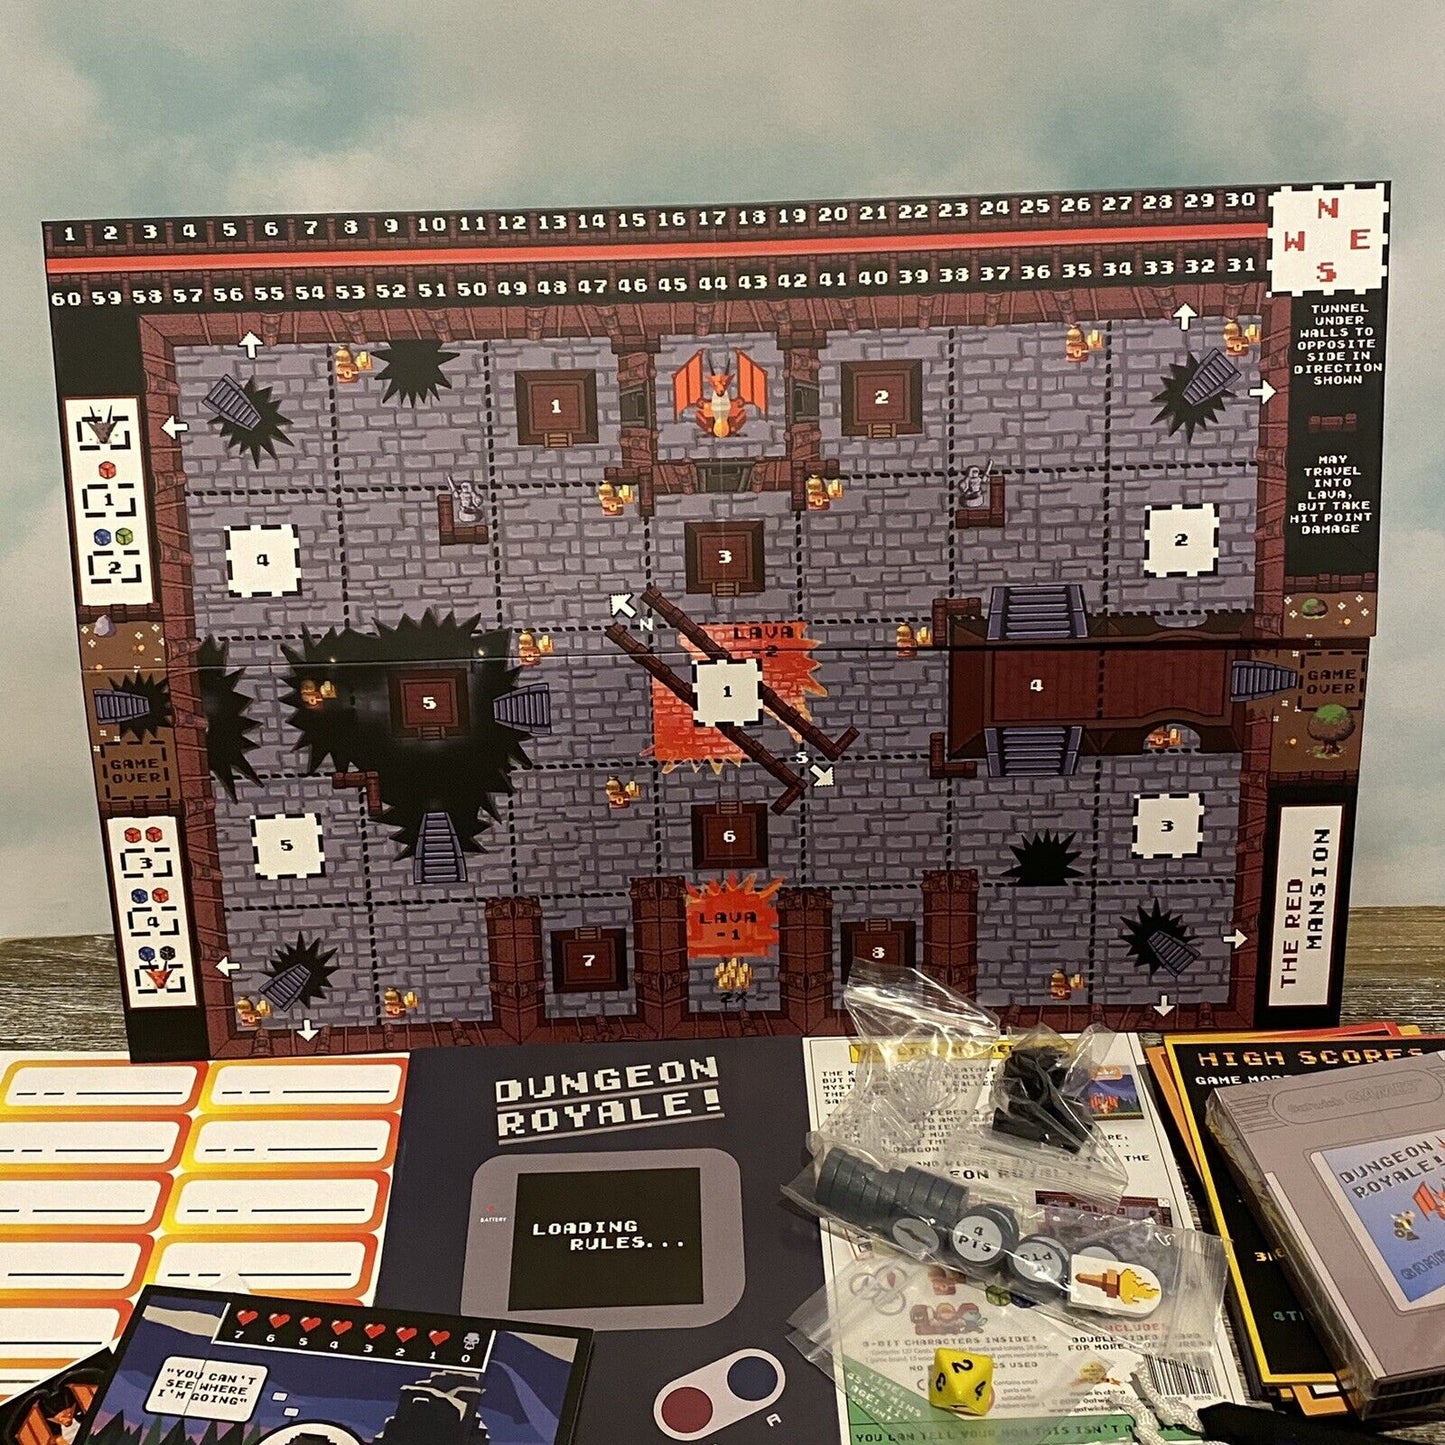 Dungeon Royale! Kickstarter Retro Game Style RPG Board Game Unpunched Unplayed